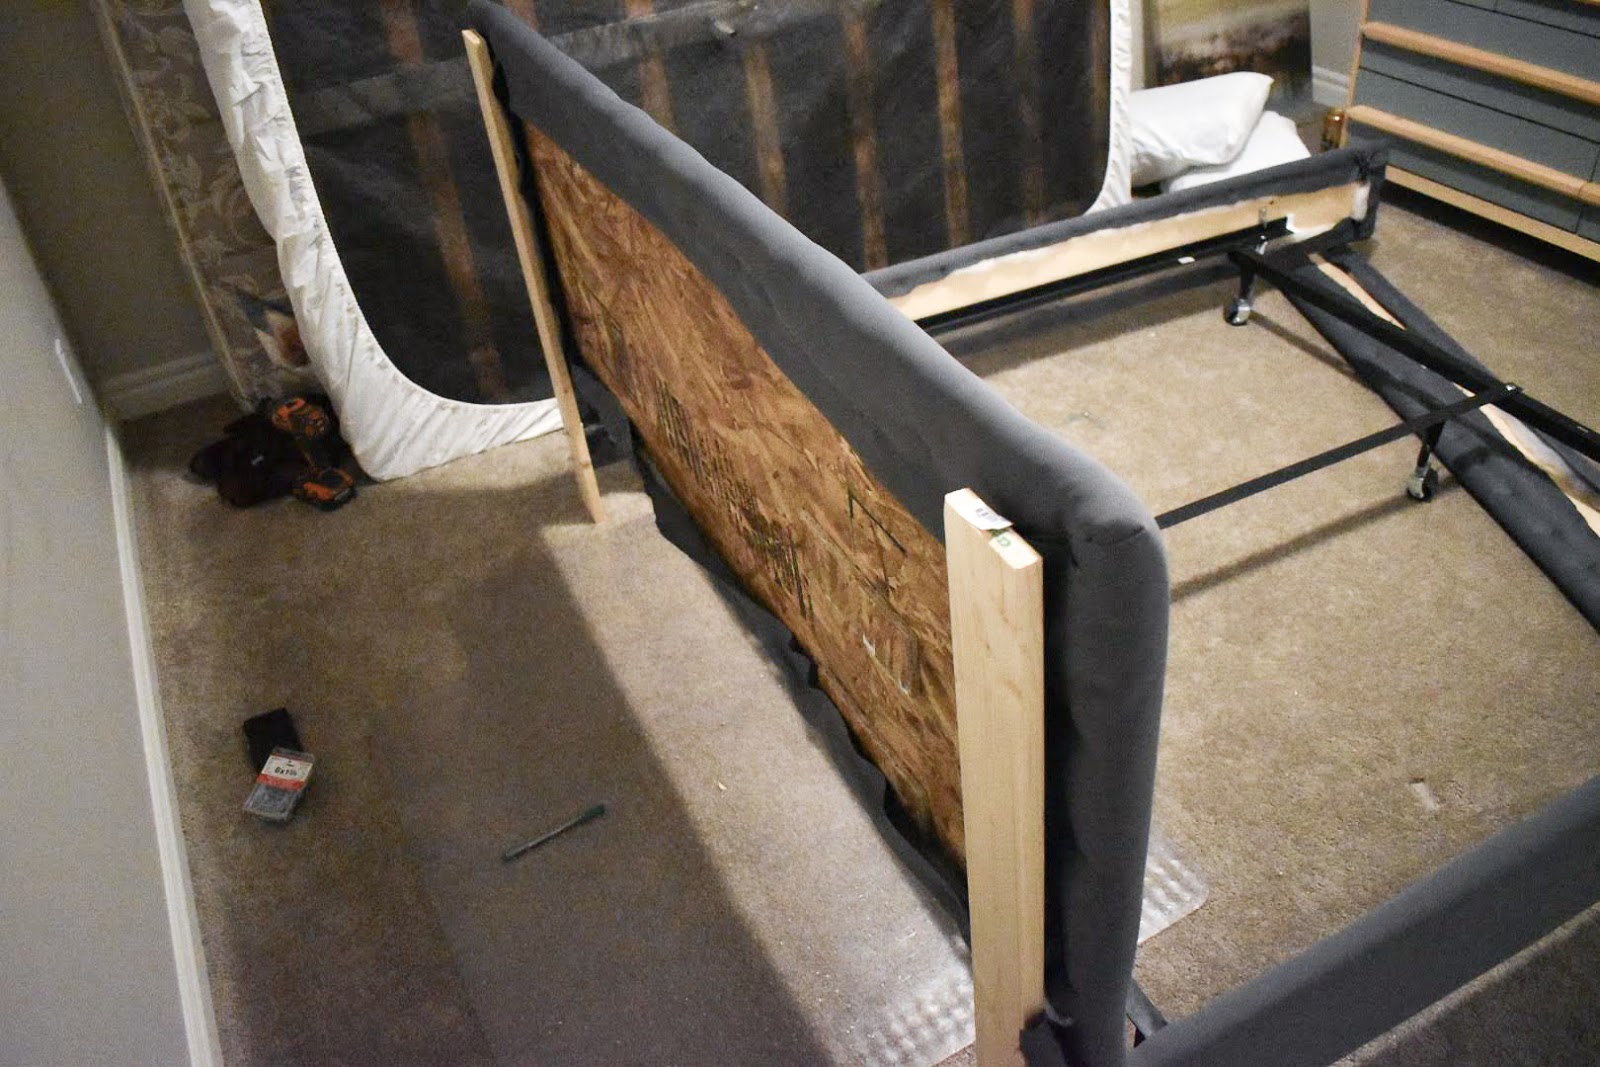 Metal Bed Frame Into An Upholstered, How To Attach Headboard Metal Frame